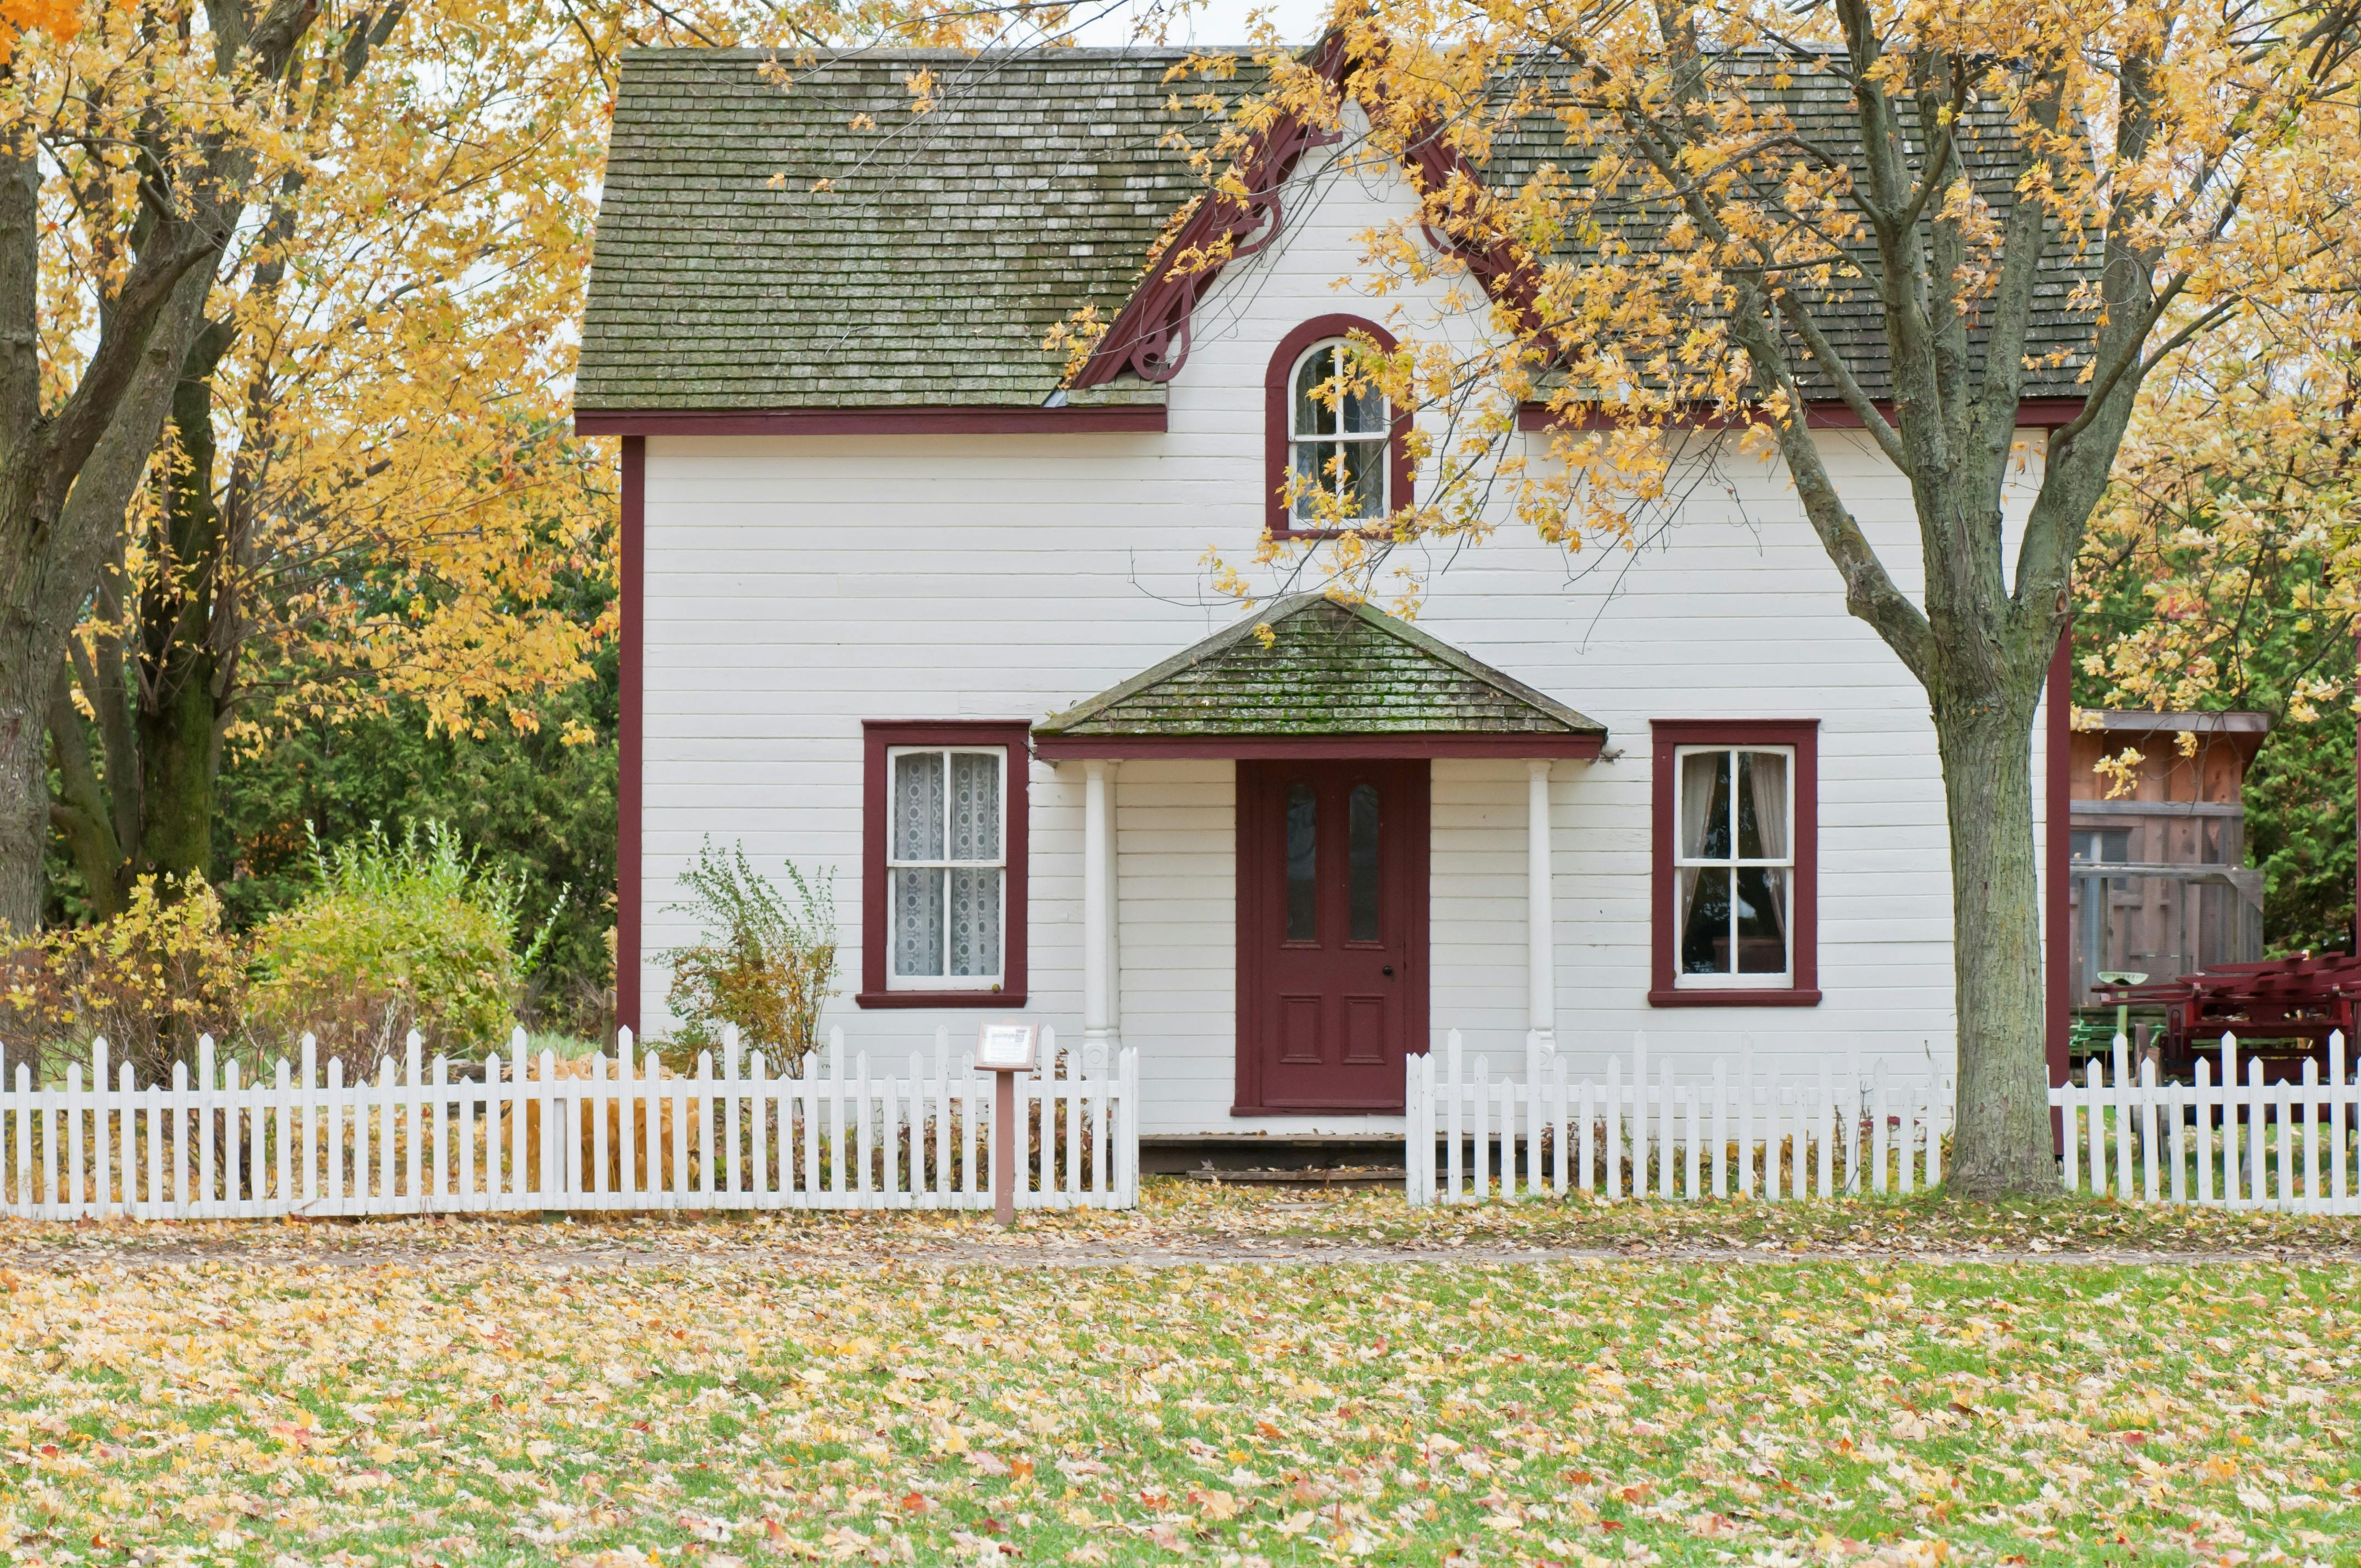 Prep Your House for the Fall. Taken by: Scott Webb